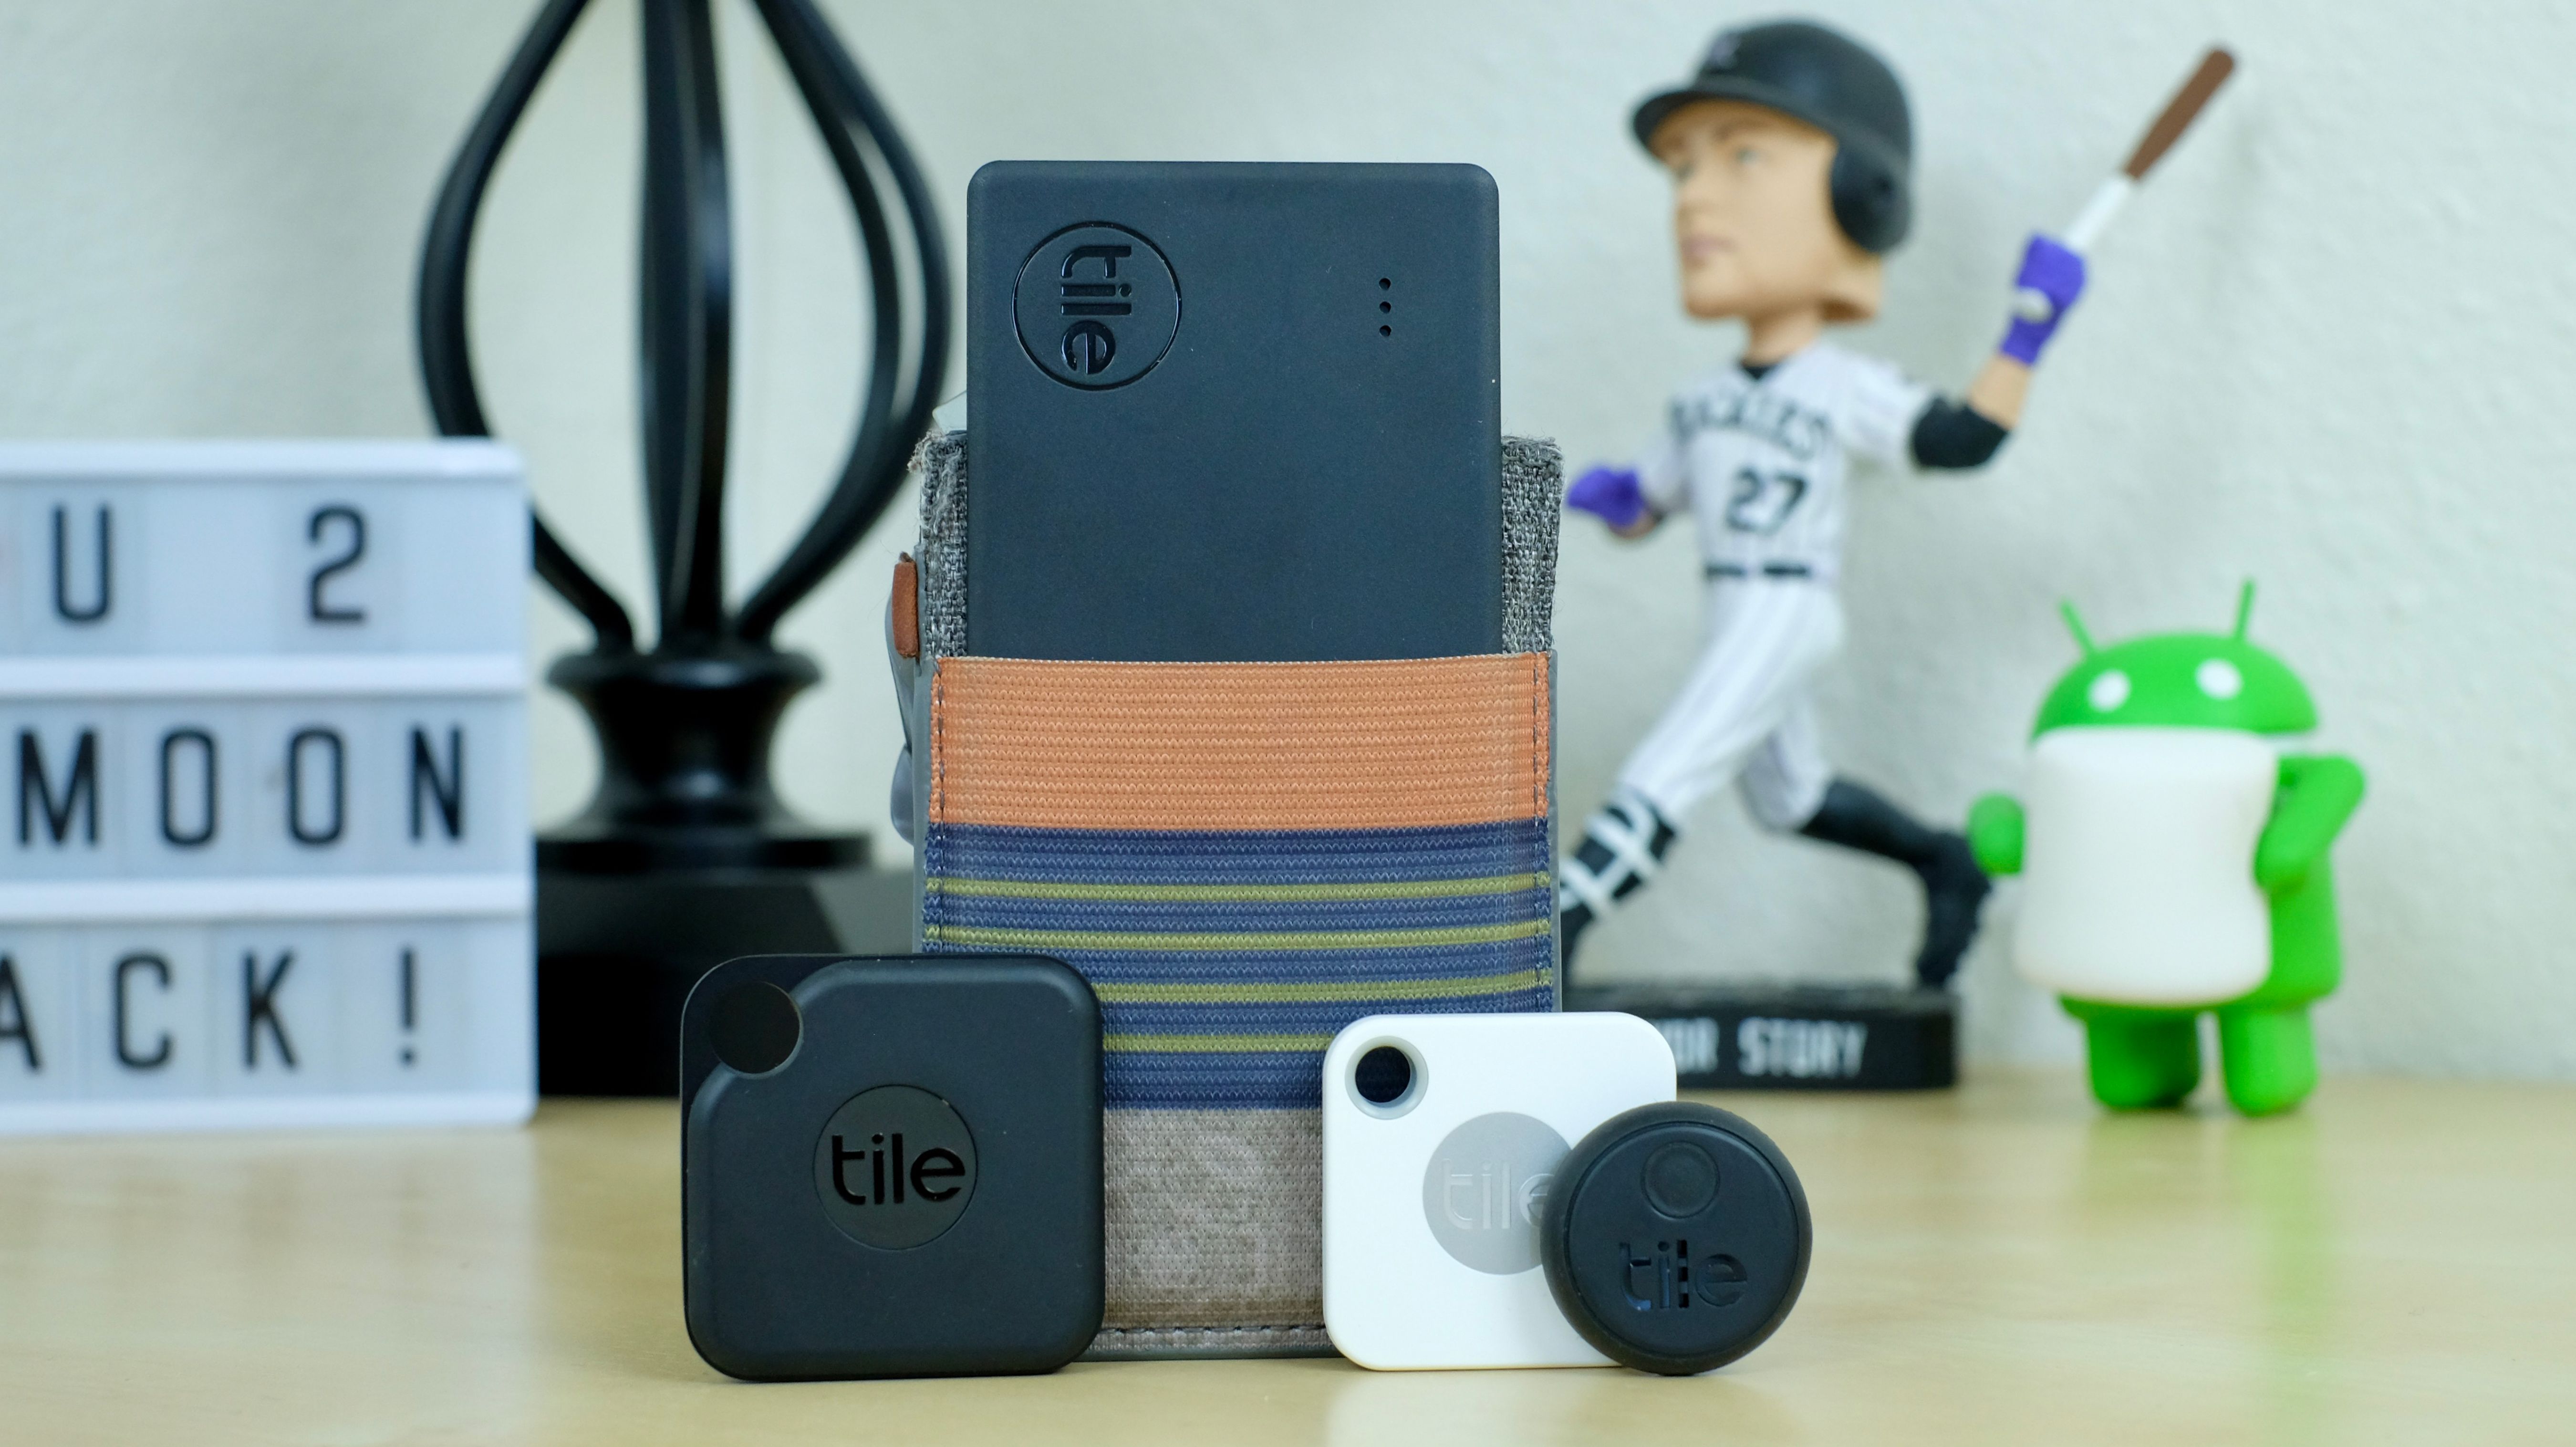 Review: Tile Sticker is a Great, Tiny, Adhesive Bluetooth Tracker 